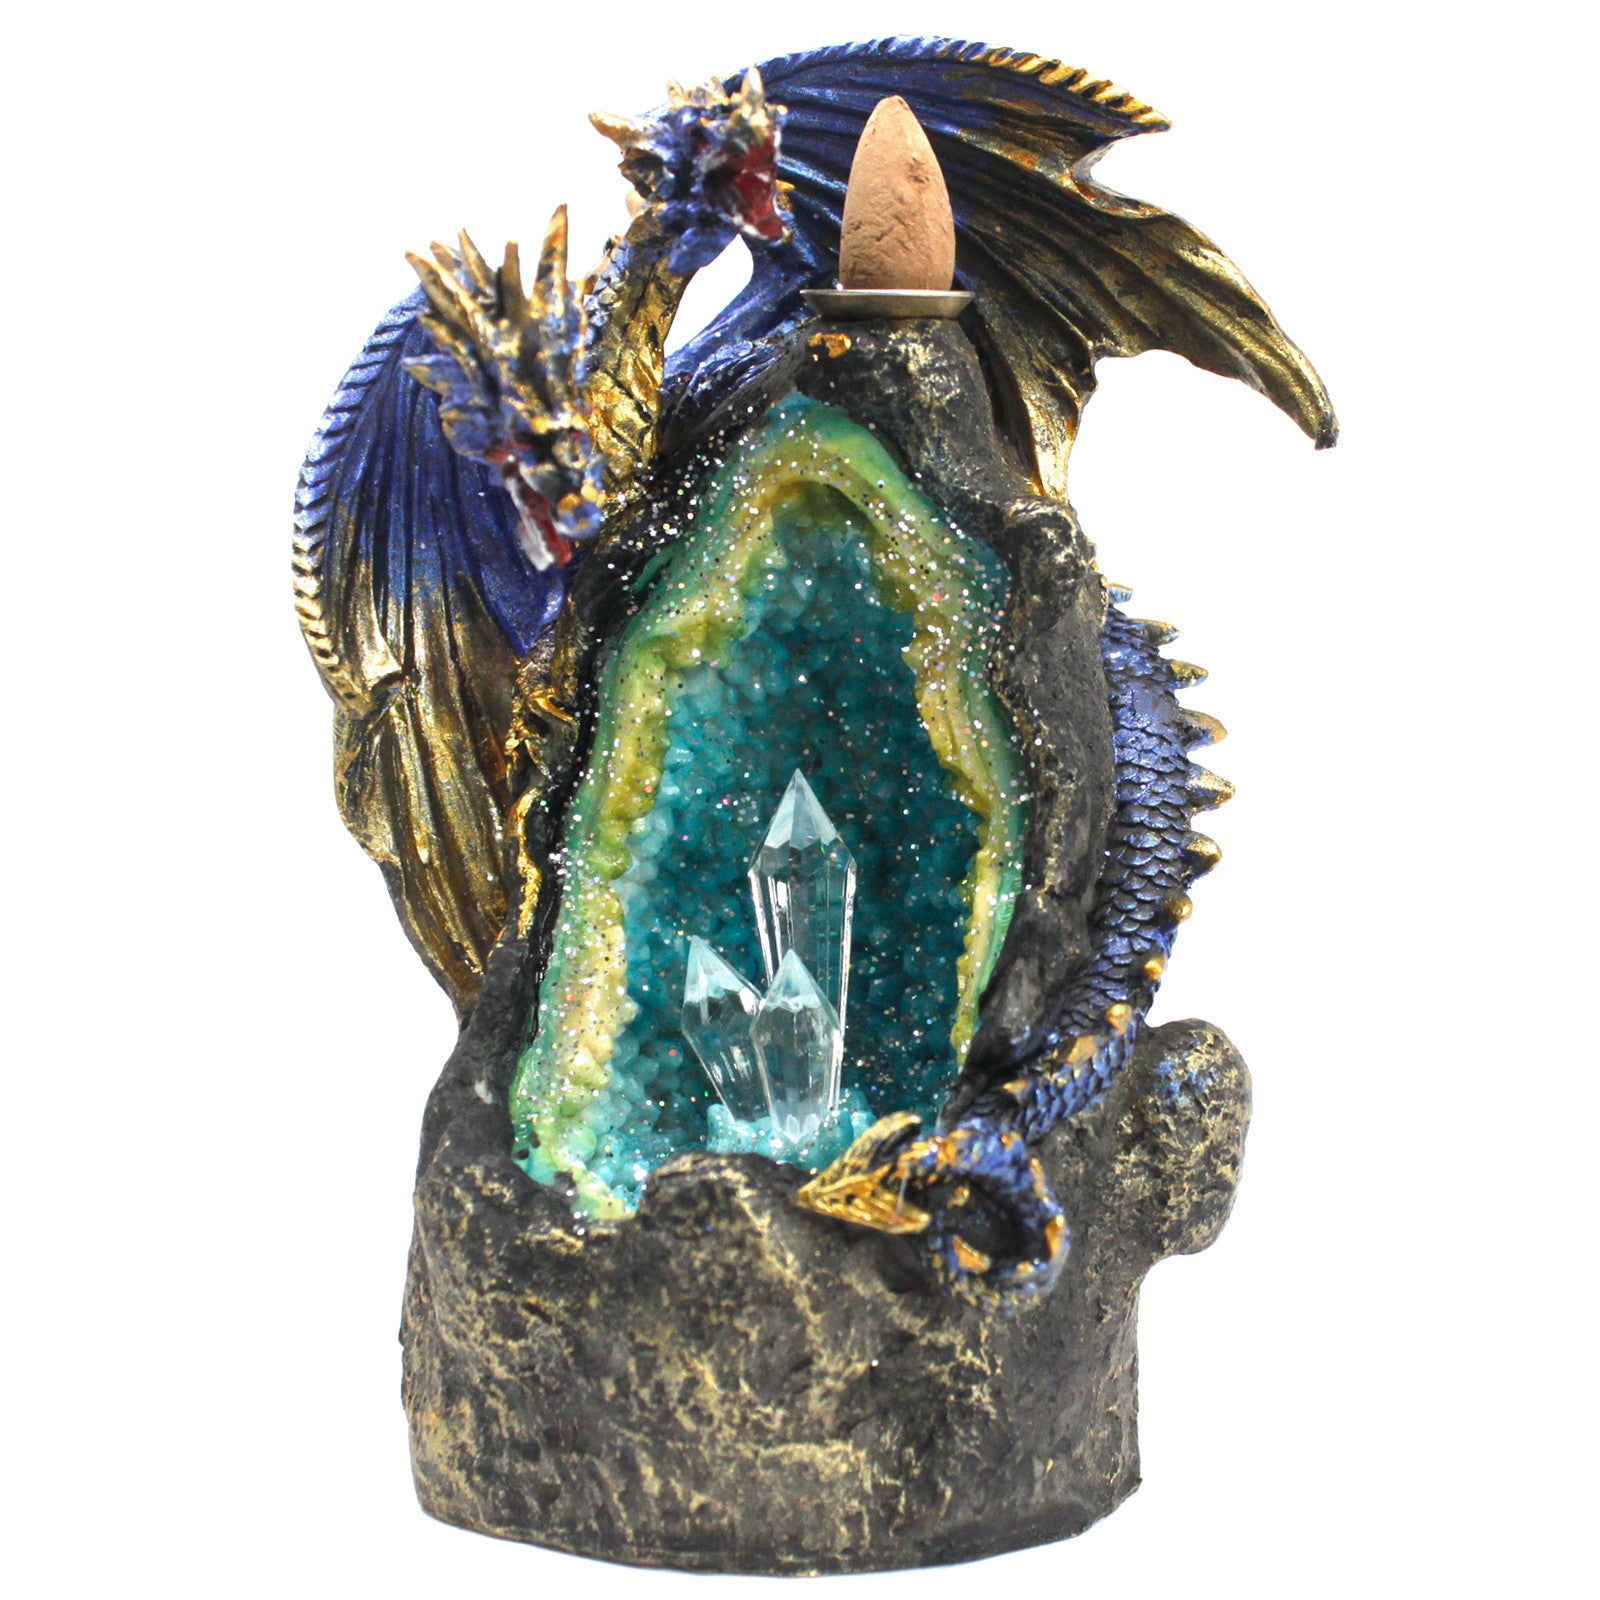 View Dragon with Crystal Cave LED Backflow Incense Burner information